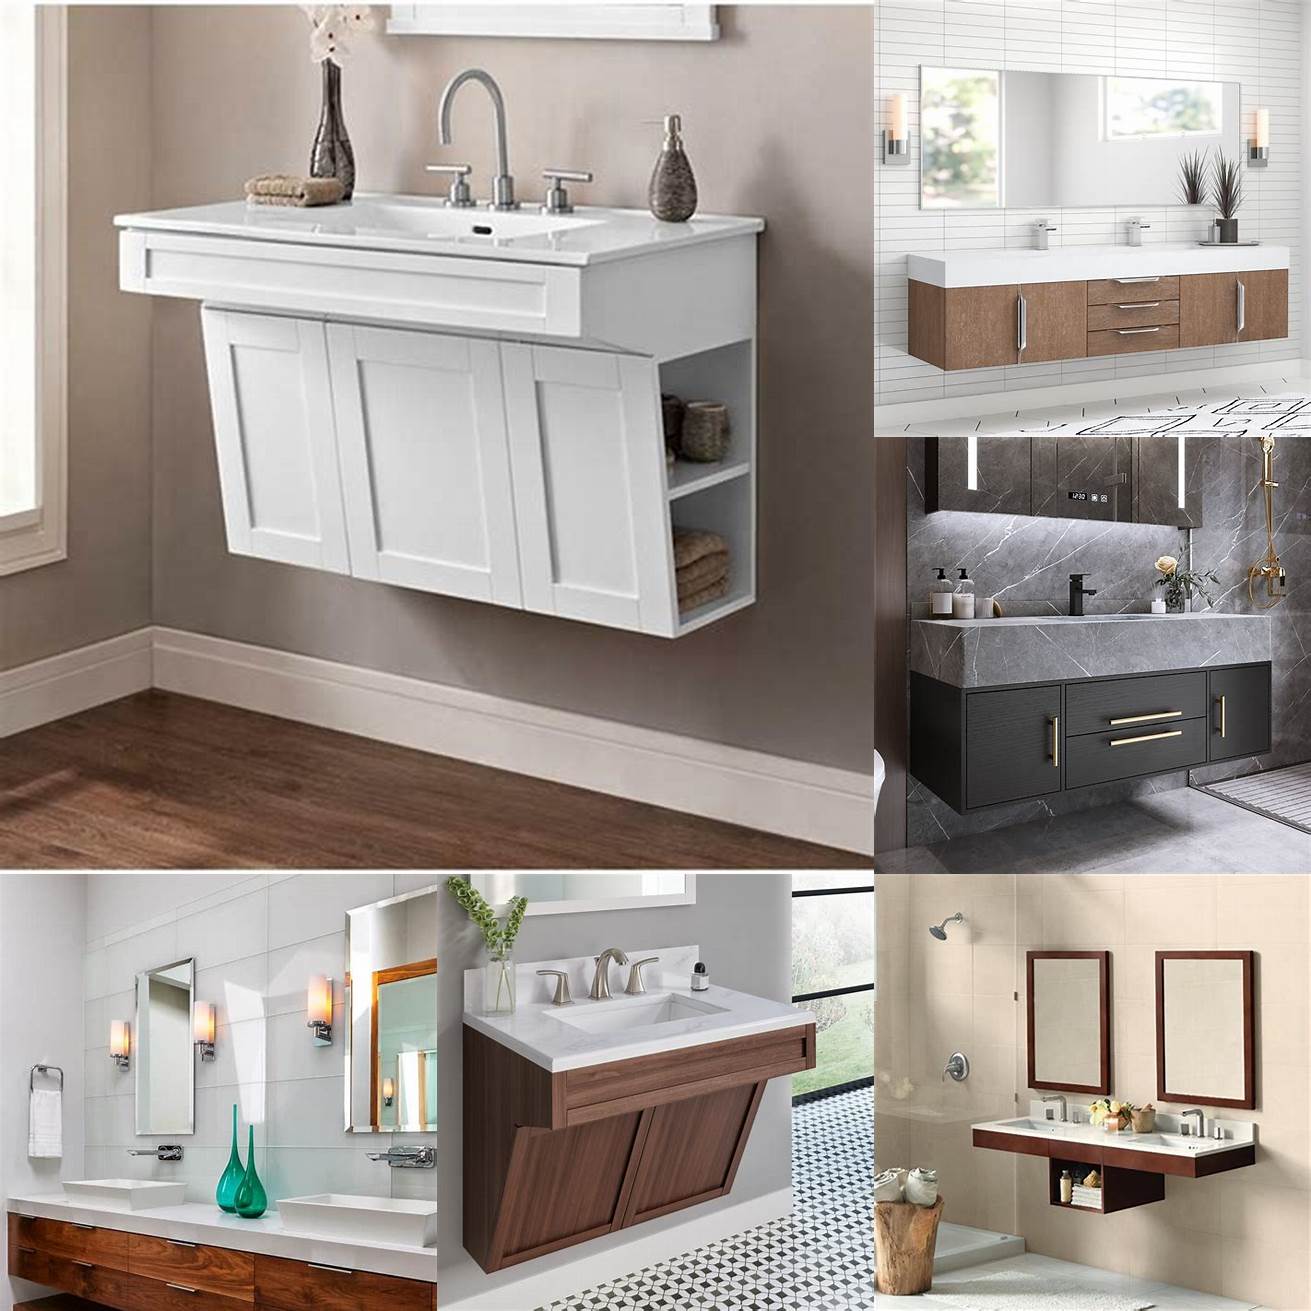 Wall-mounted vanities are attached to the wall freeing up floor space and making your bathroom look bigger They come in different styles and sizes and they can be made of different materials such as wood metal and glass They are easy to install and provide ample storage space However they require professional installation and can be more expensive than other types of vanities